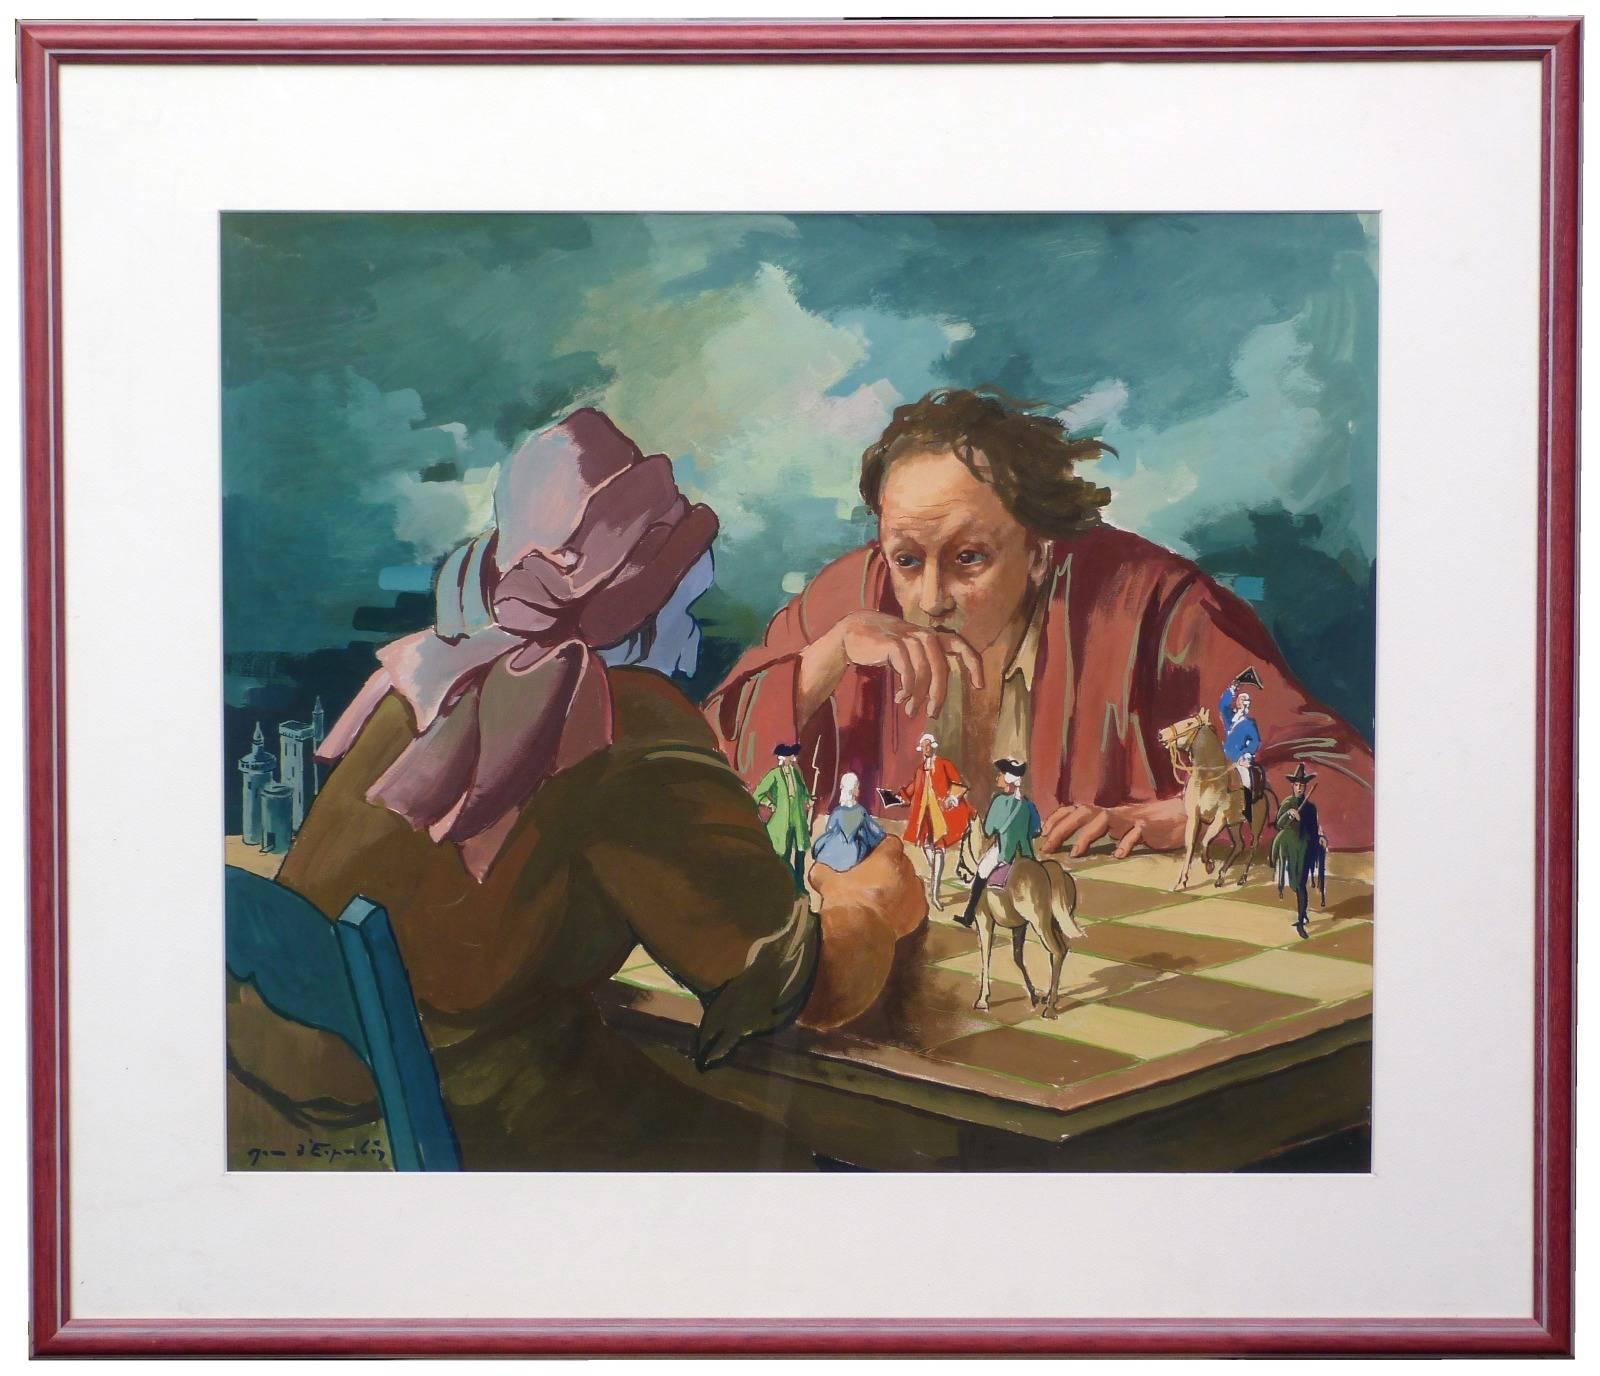 Surrealist chess players playing with lives - Painting by Jean d'ESPARBÈS